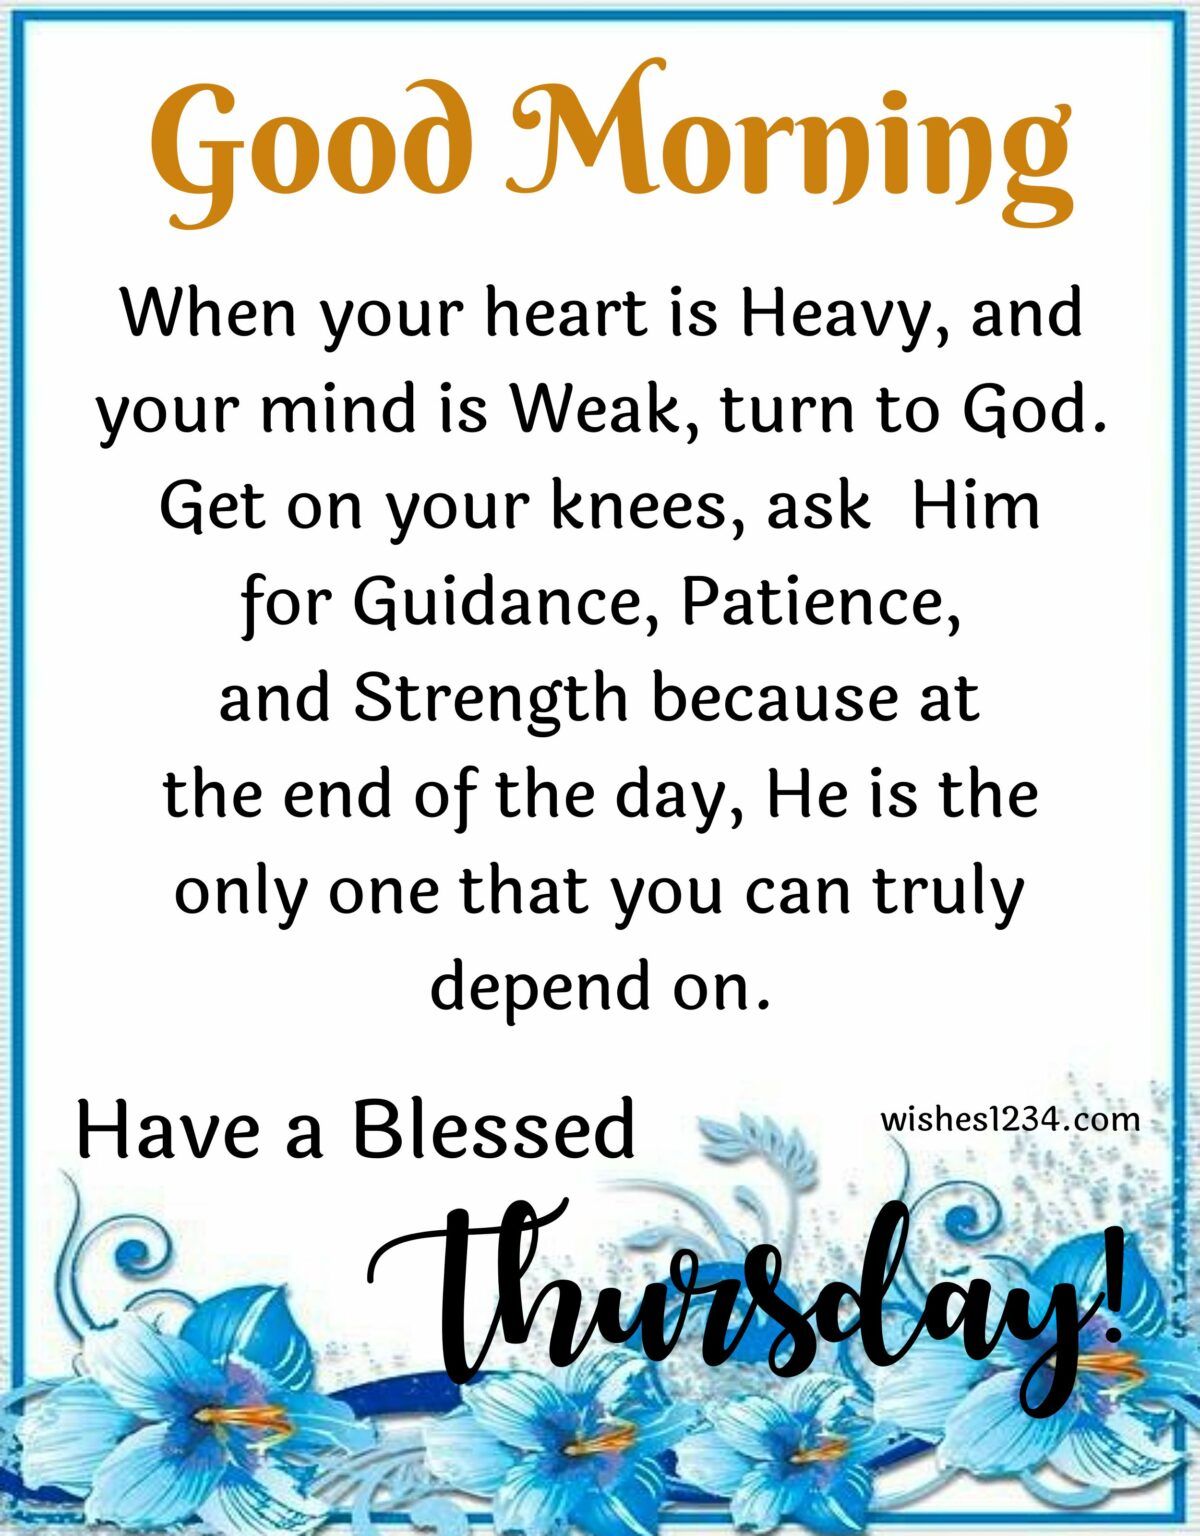 100+ Thursday quotes, blessings, wishes, messages with images